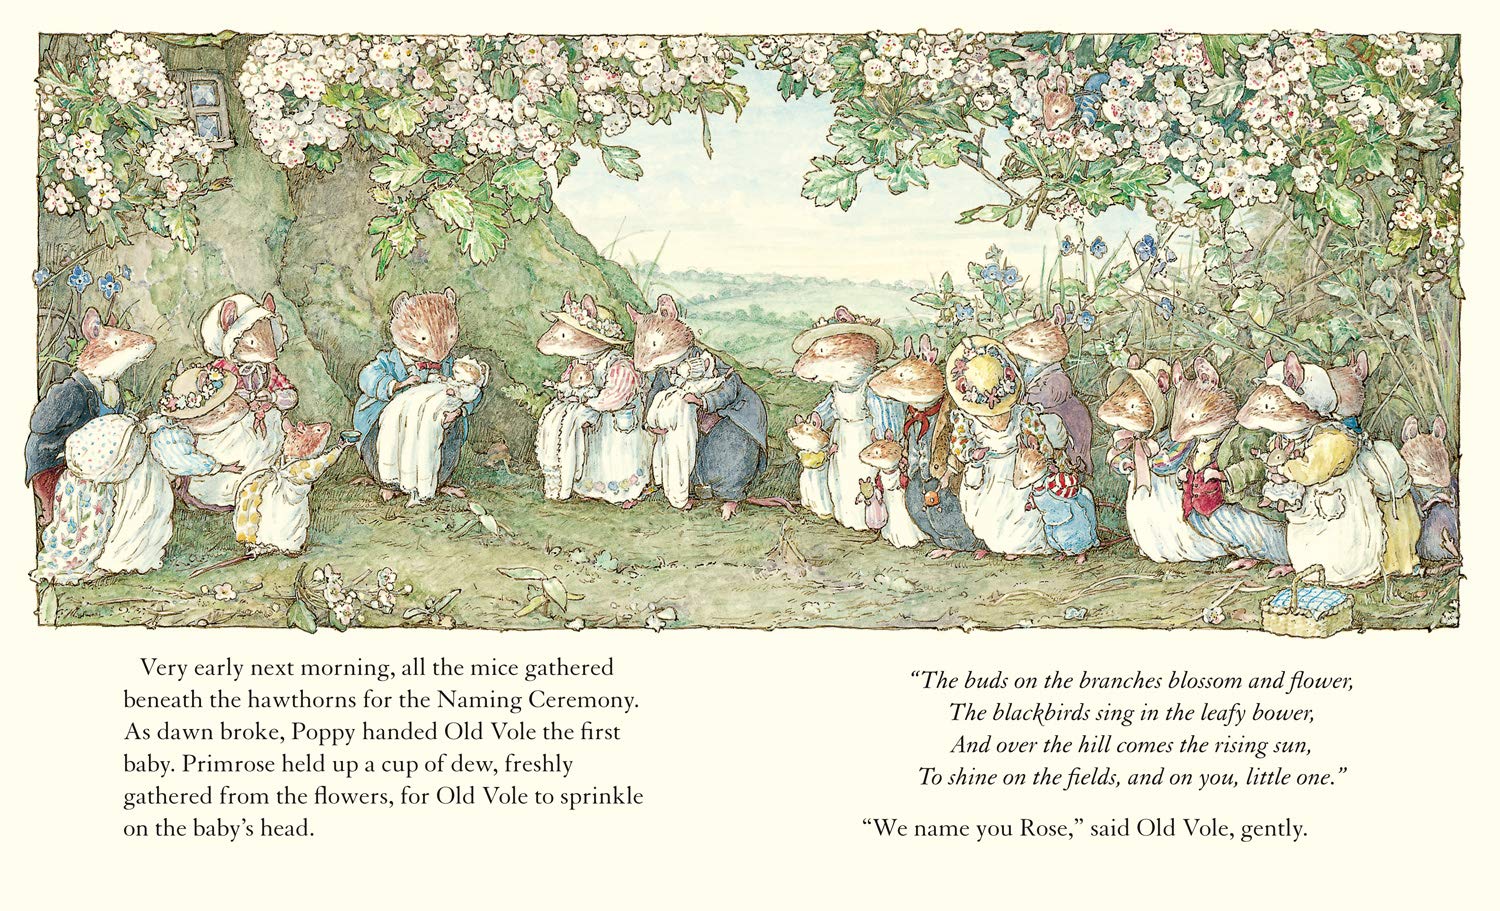 Adventures in Brambly Hedge by Jill Barklem – A Toy Garden